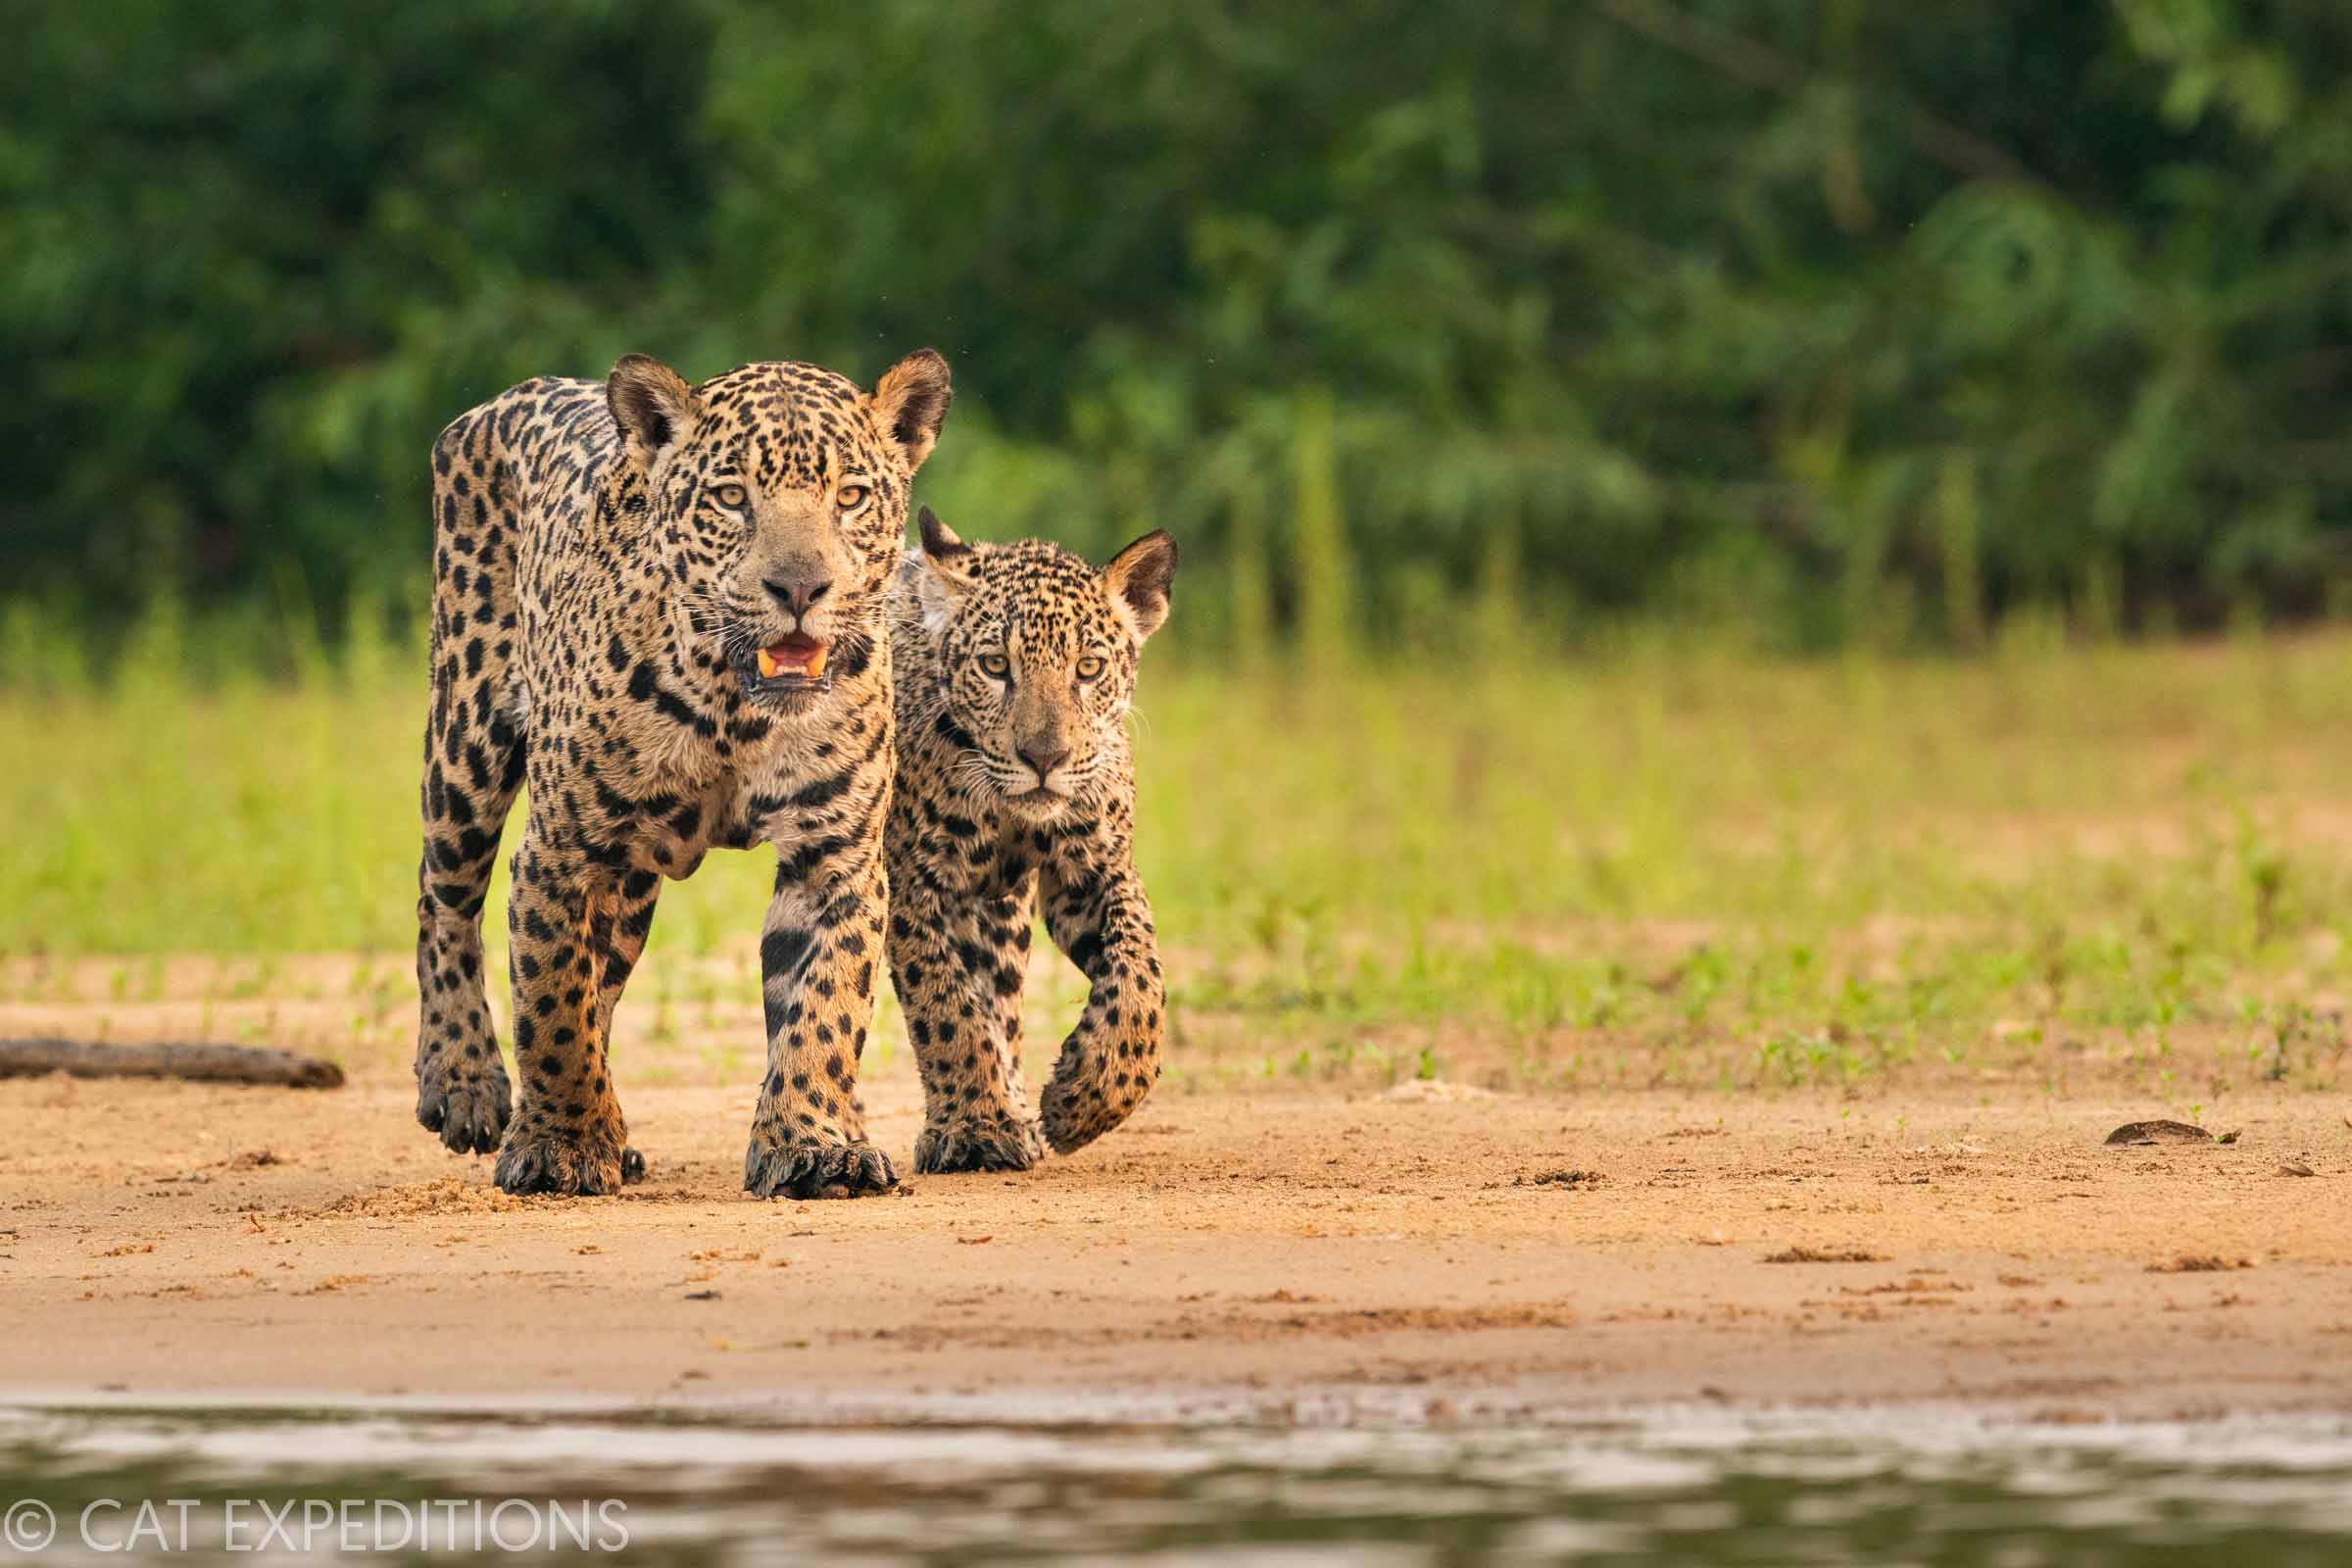 Jaguar mother and cub looking at camera in Brazil